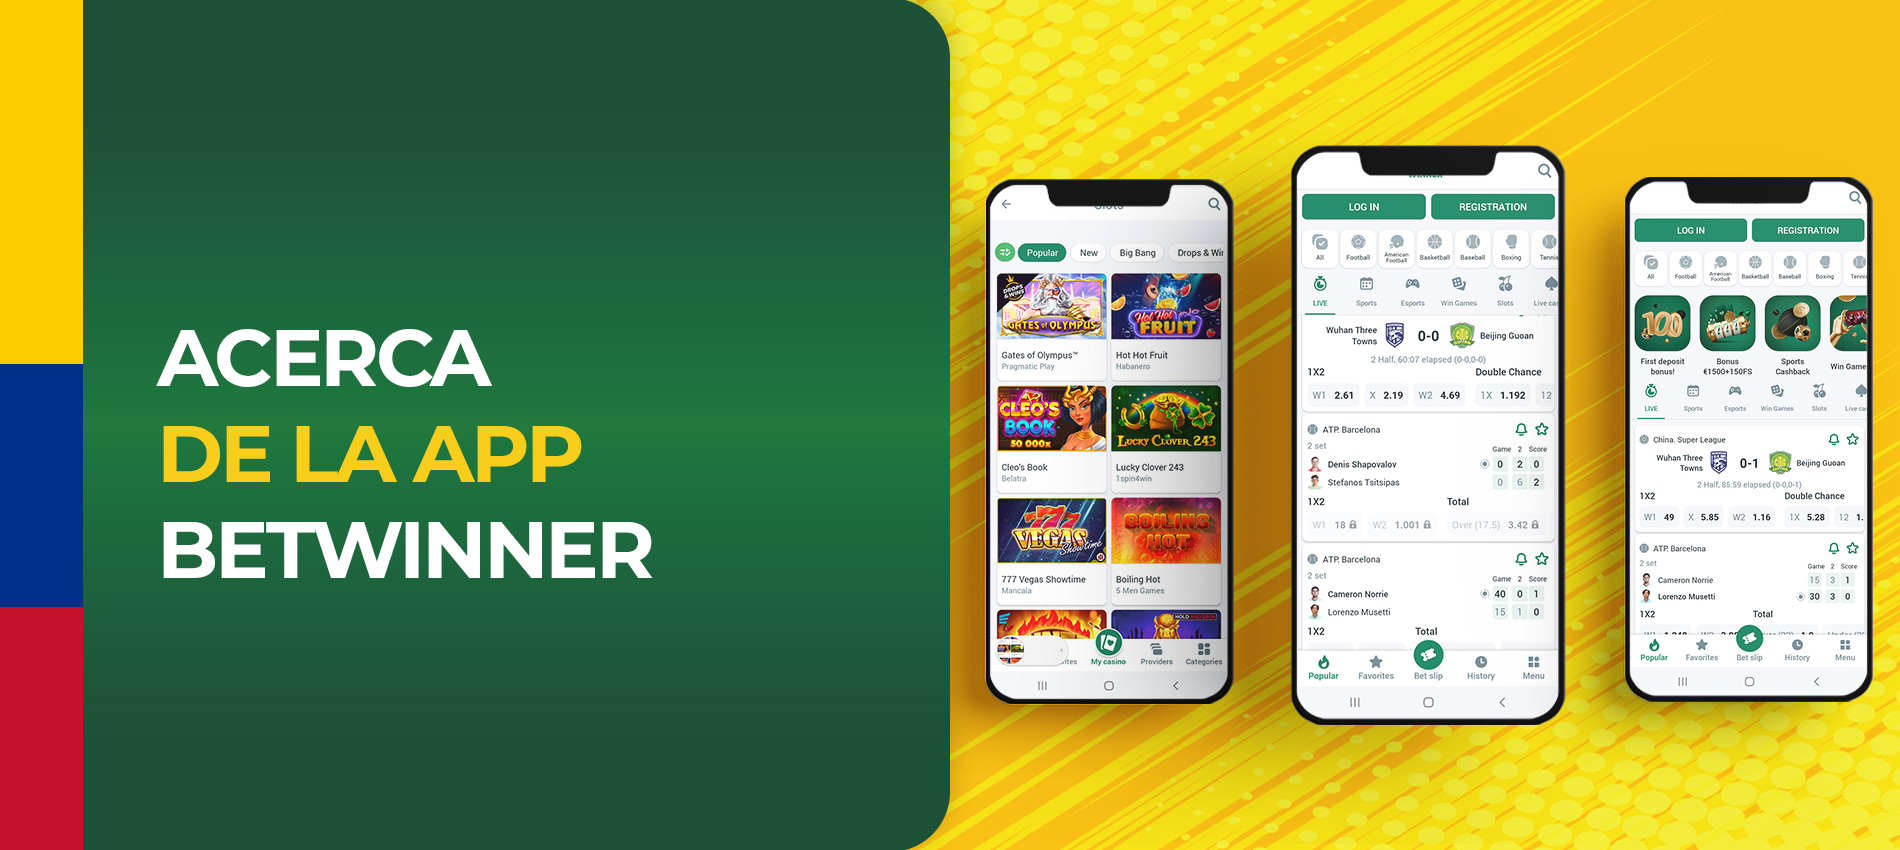 betwinner apk Is Your Worst Enemy. 10 Ways To Defeat It